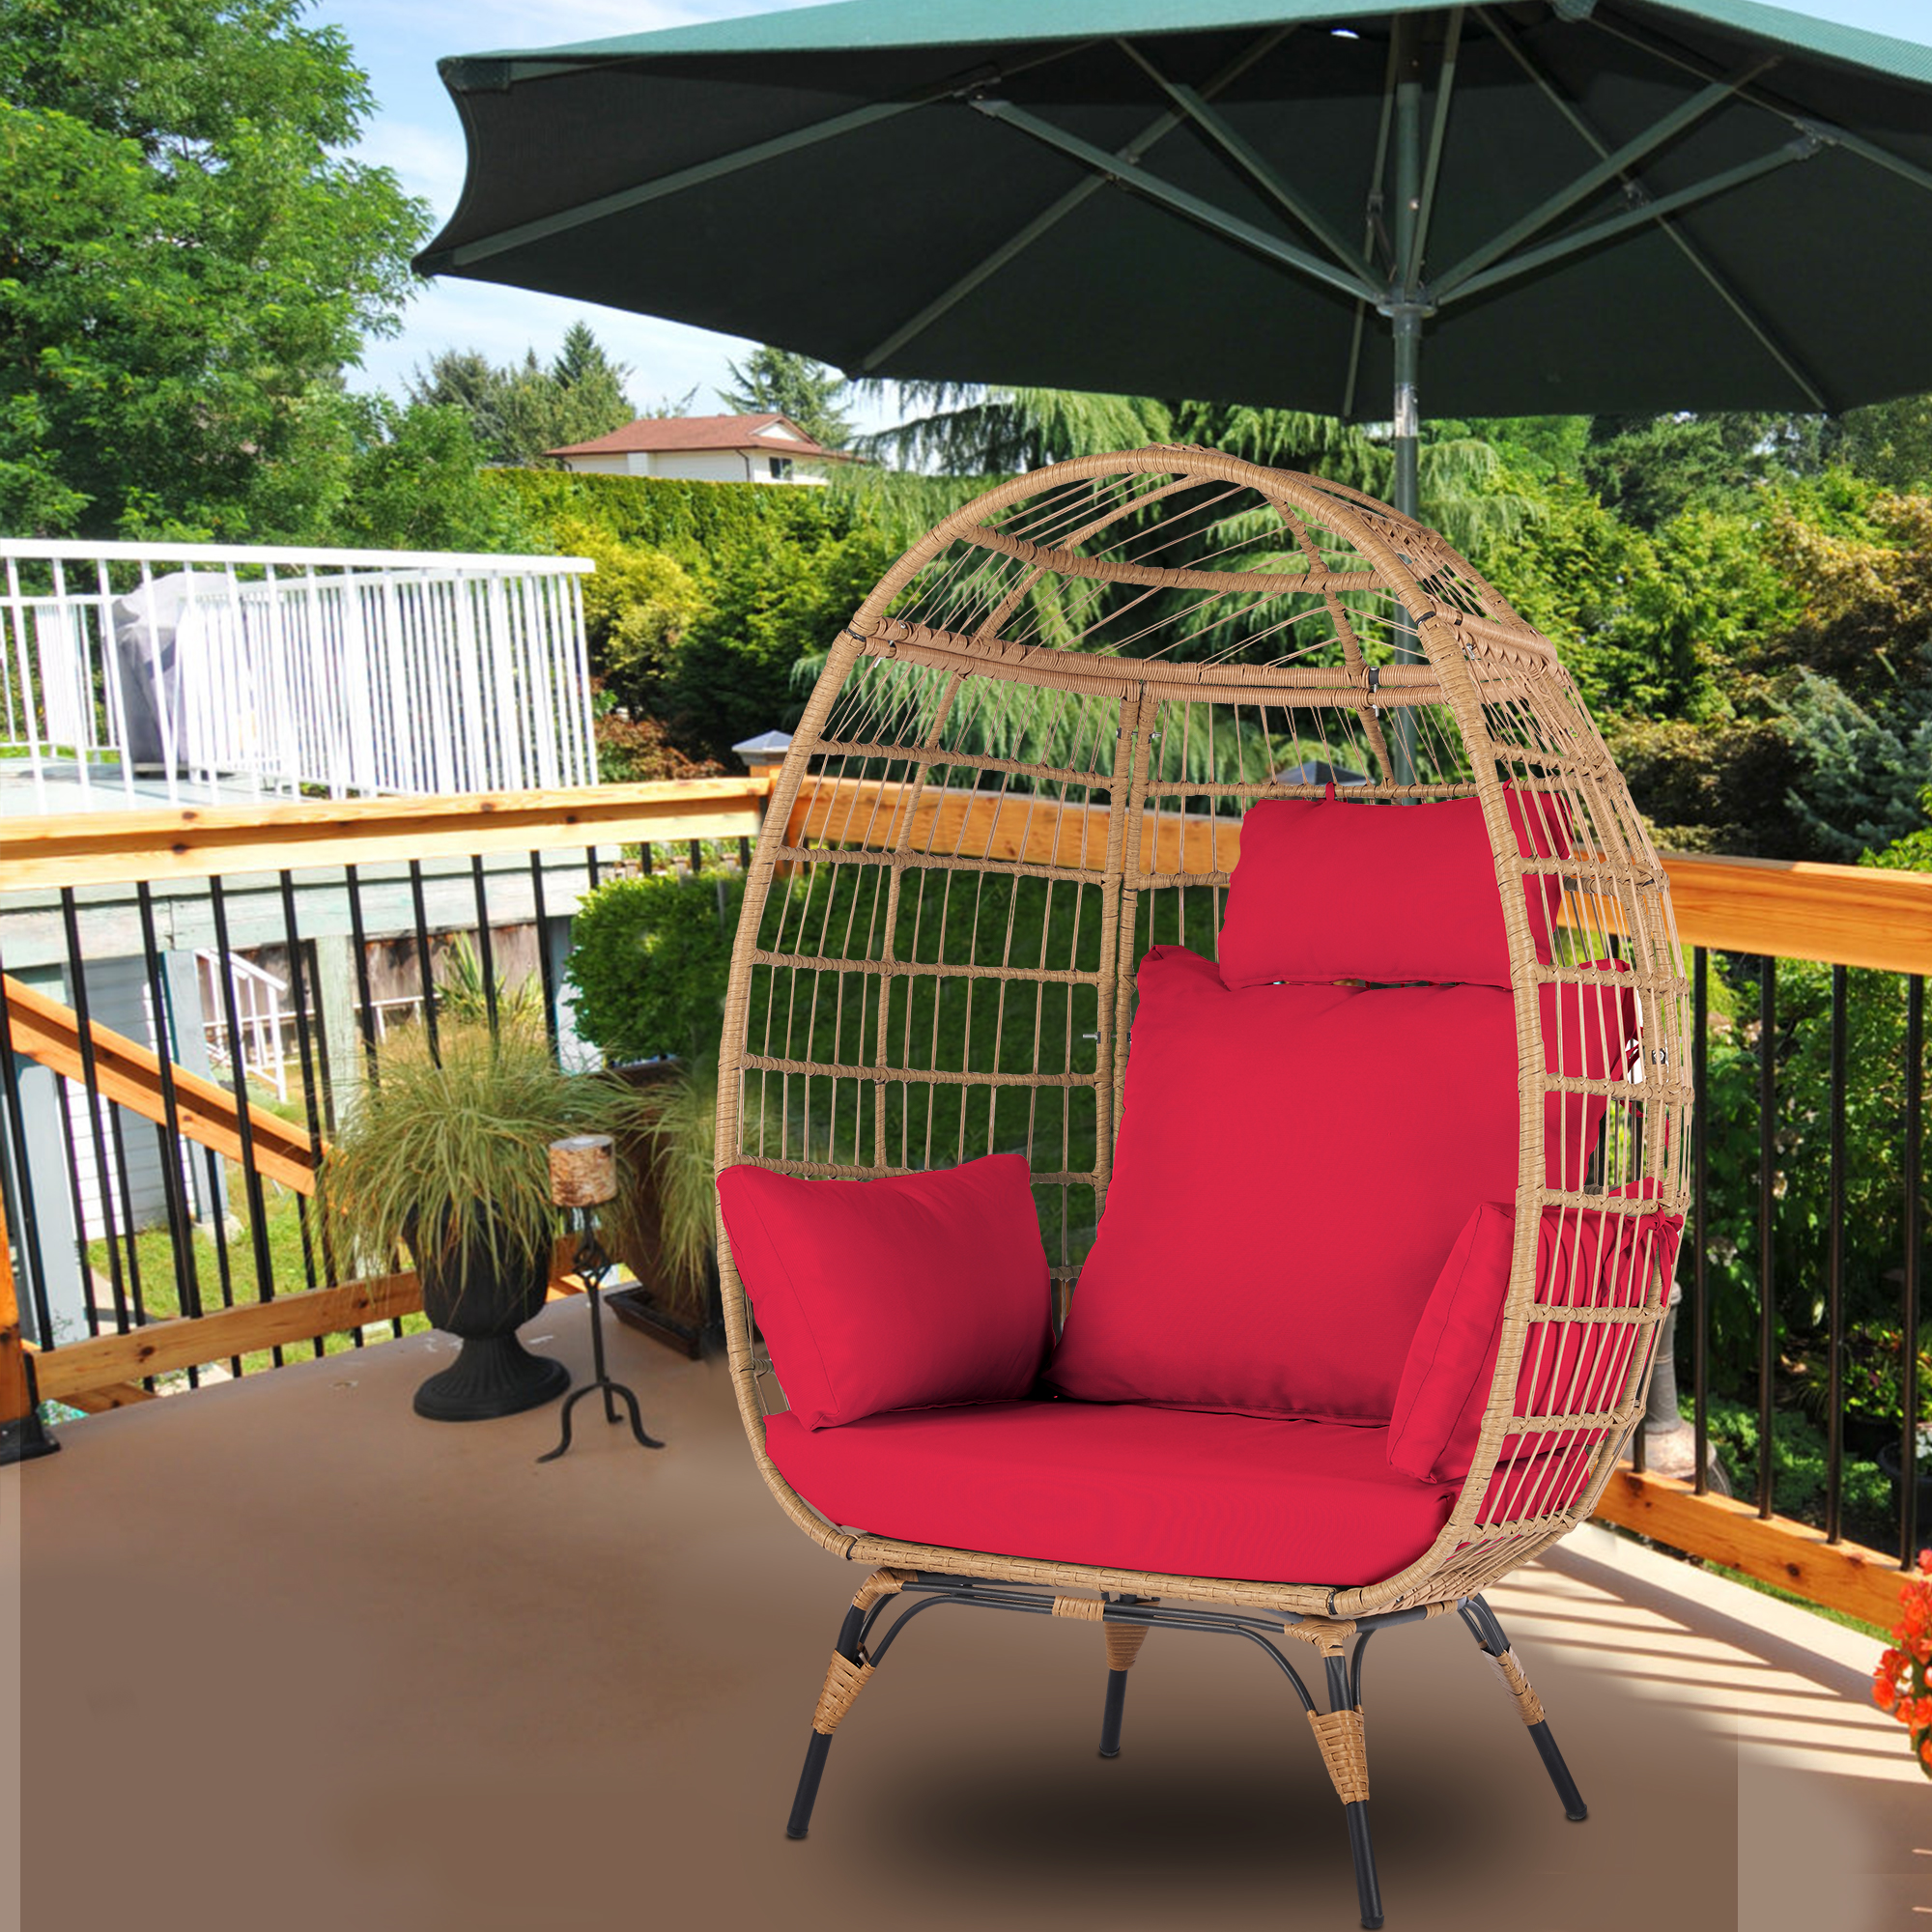 Wicker Egg Chair, Oversized Indoor Outdoor Boho Lounger Chair Stationary Egg Basket Chair, All-Weather 440lb Capacity Patio Chair, Red - image 2 of 9